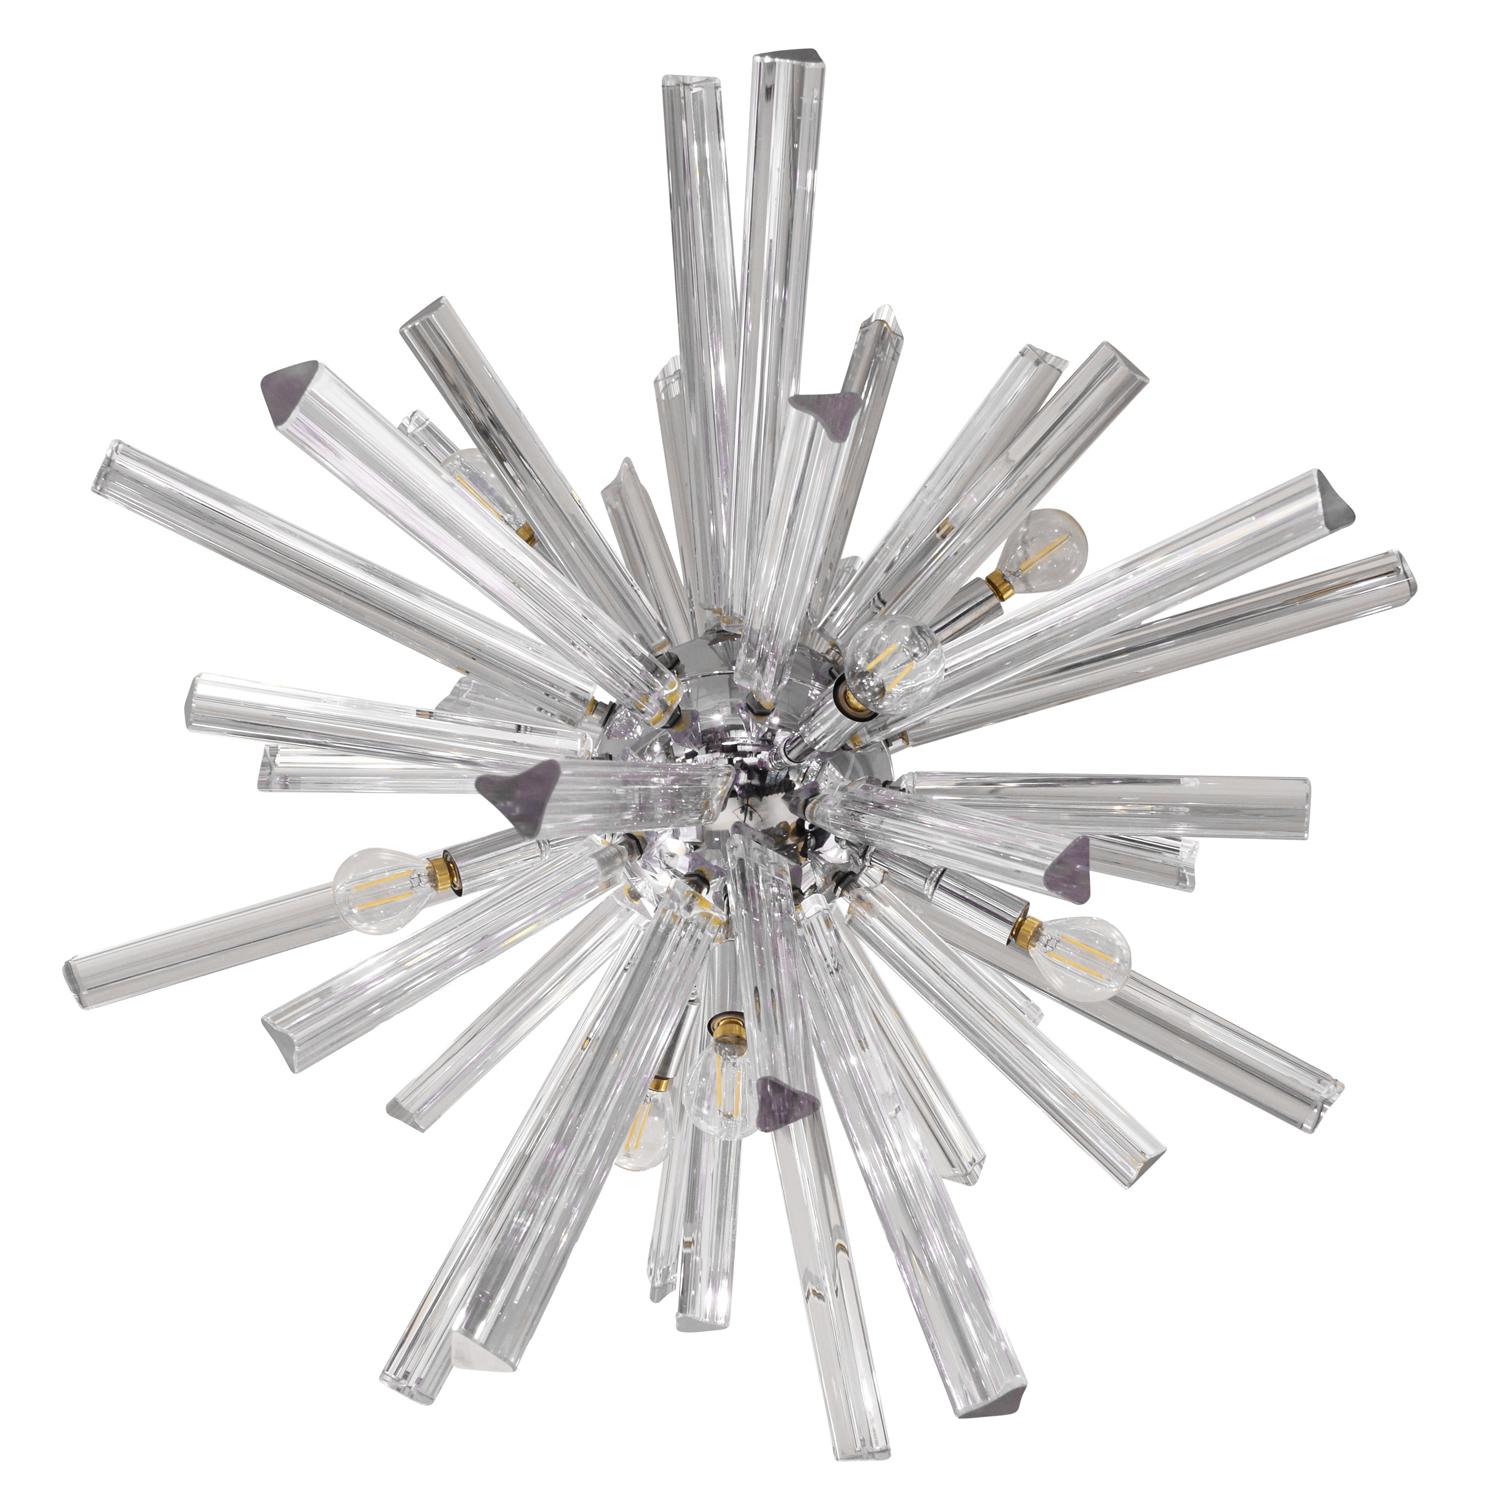 Sputnik style chandelier model N3001 in polished chrome with glass rods by Venini (Murano Italy) for Camer lighting, American, 1970s. A timeless chic design.